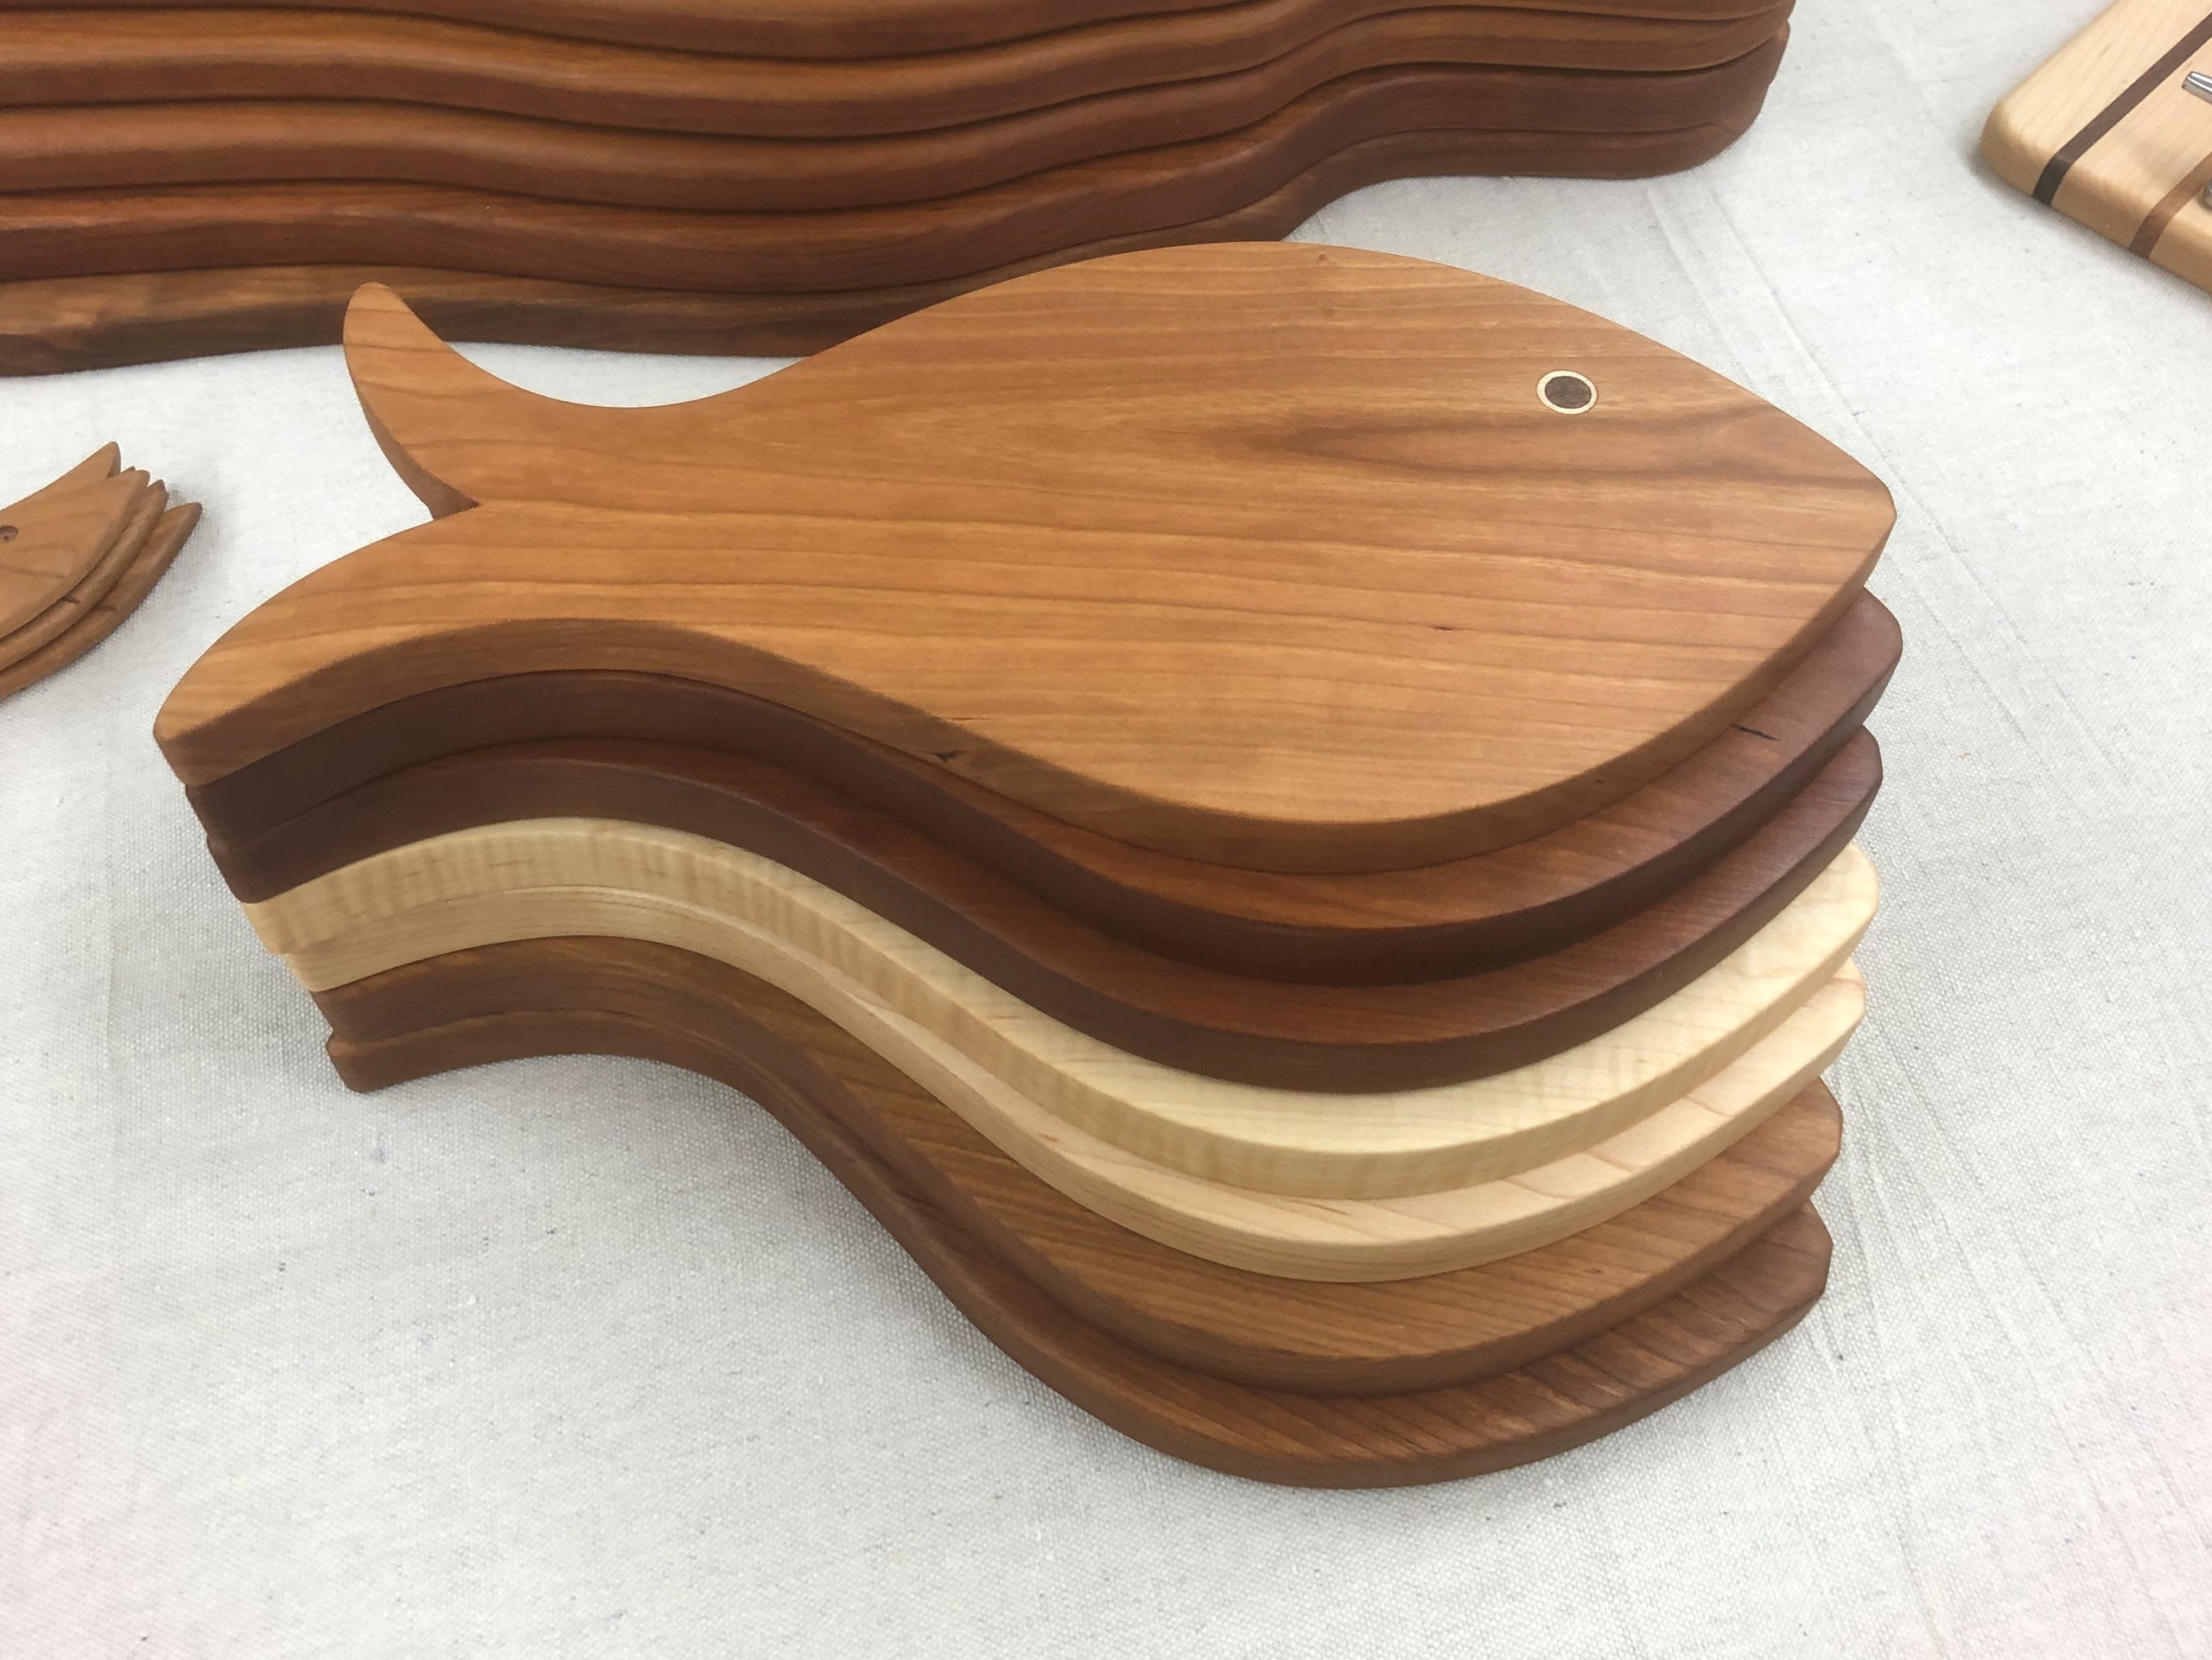 Fish Shaped Cutting board - Words with Boards, LLC